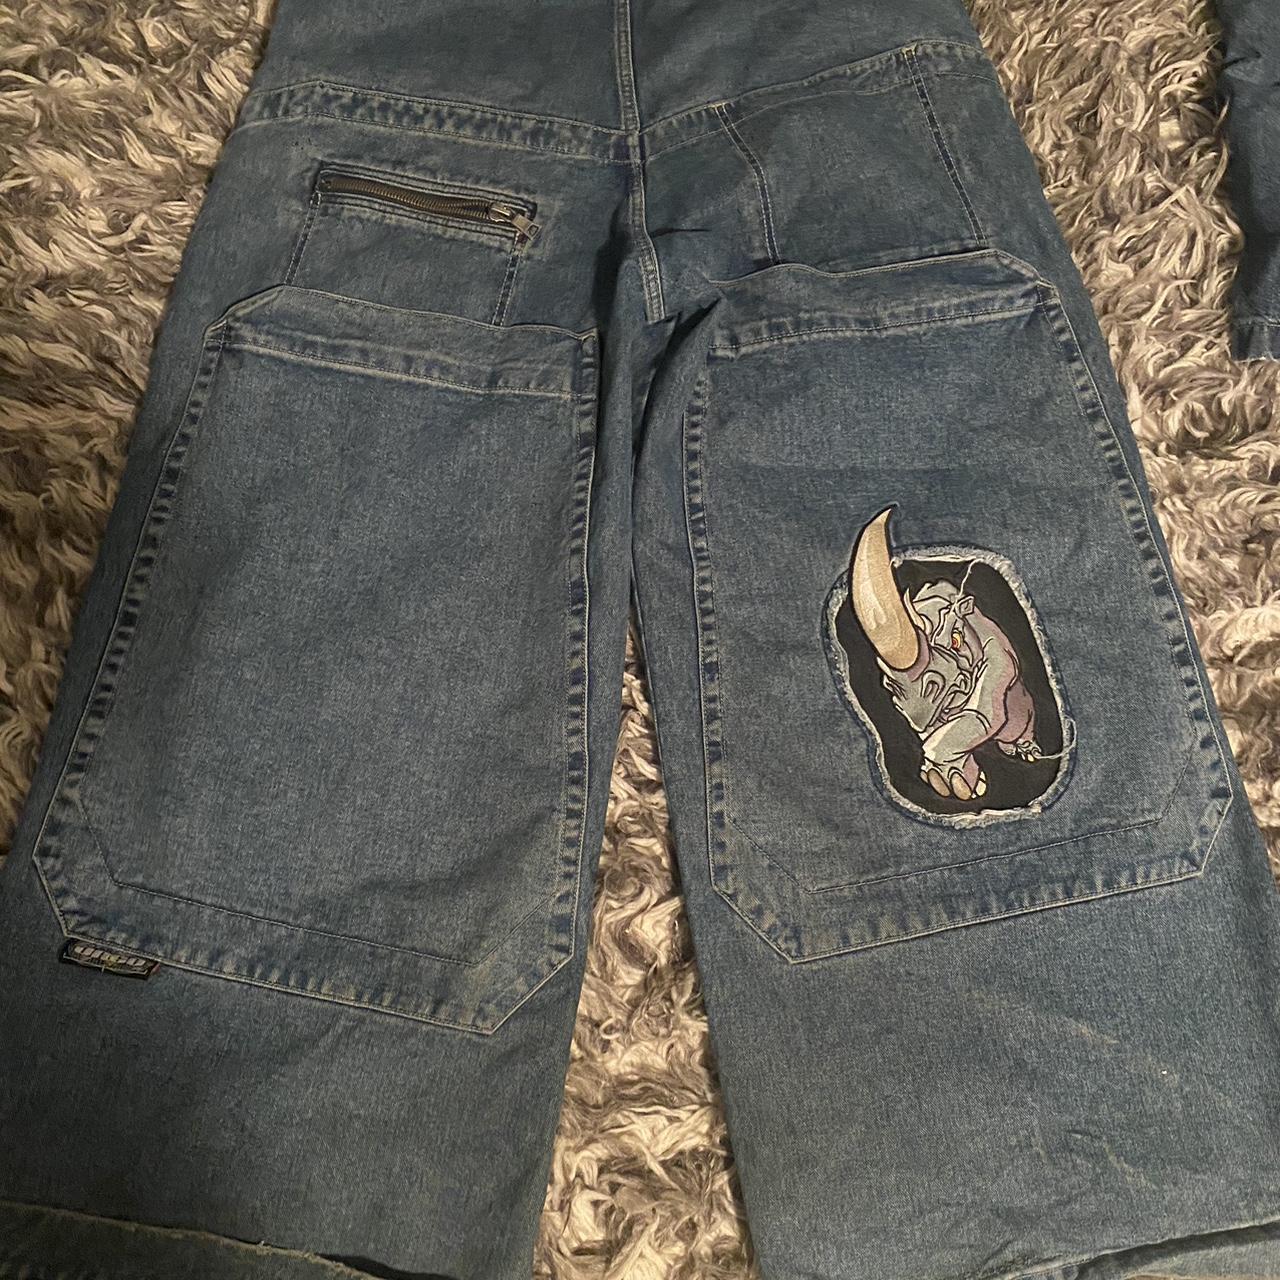 Jnco Rare Rhinoceros Baggy Vintage Jeans These are... - Depop